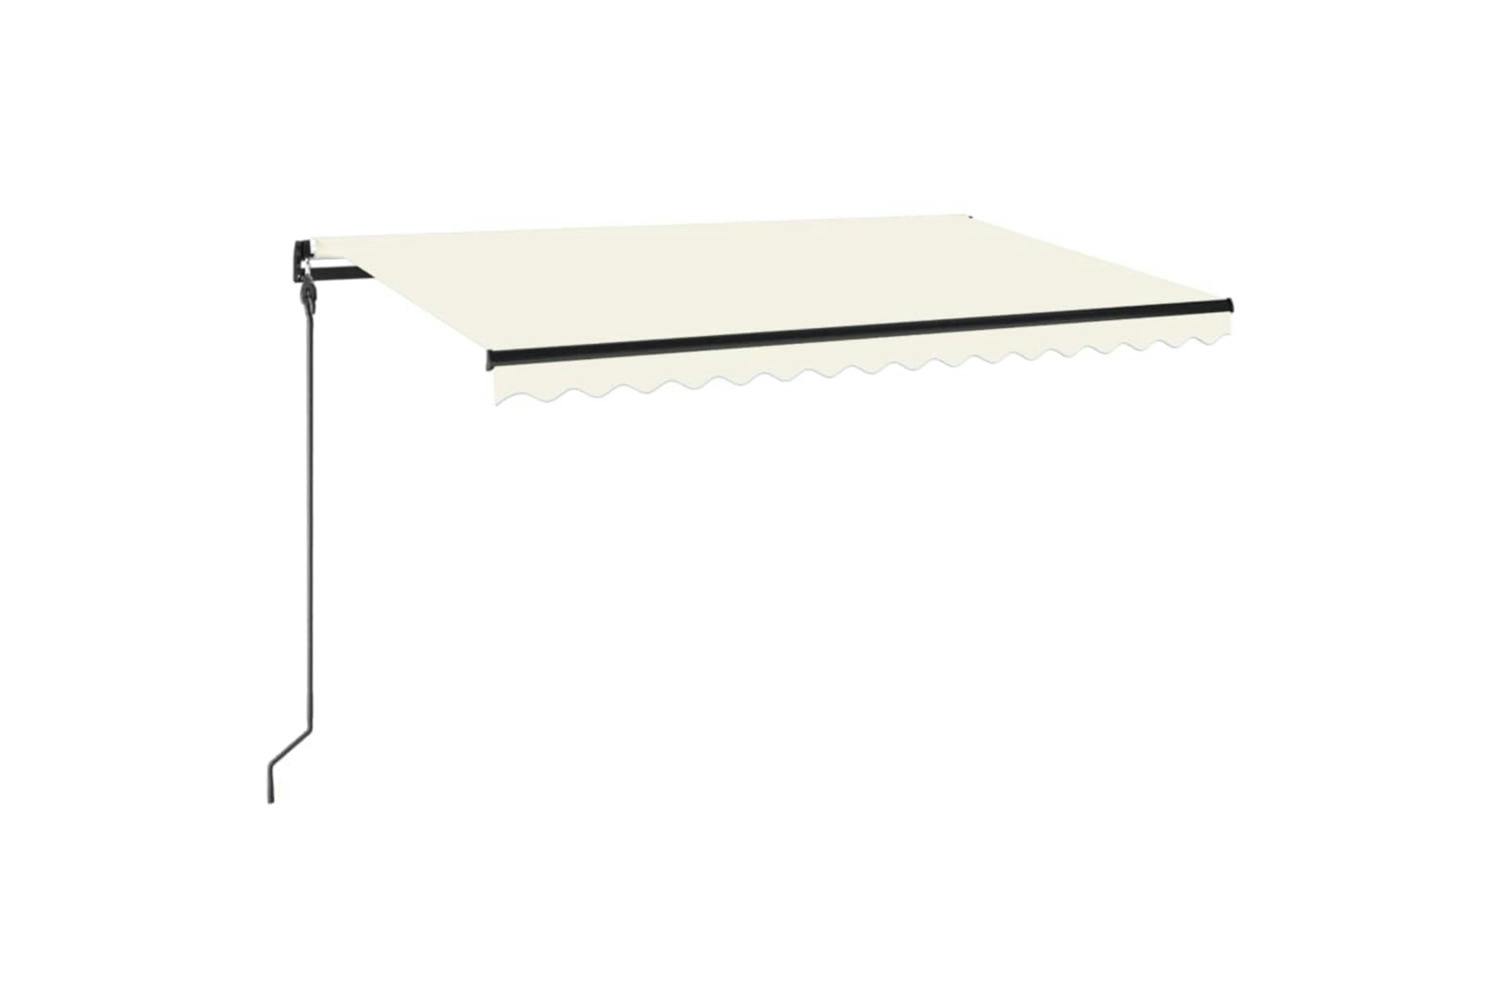 Vidaxl 3069122 Manual Retractable Awning With Led 450x300 Cm Cream